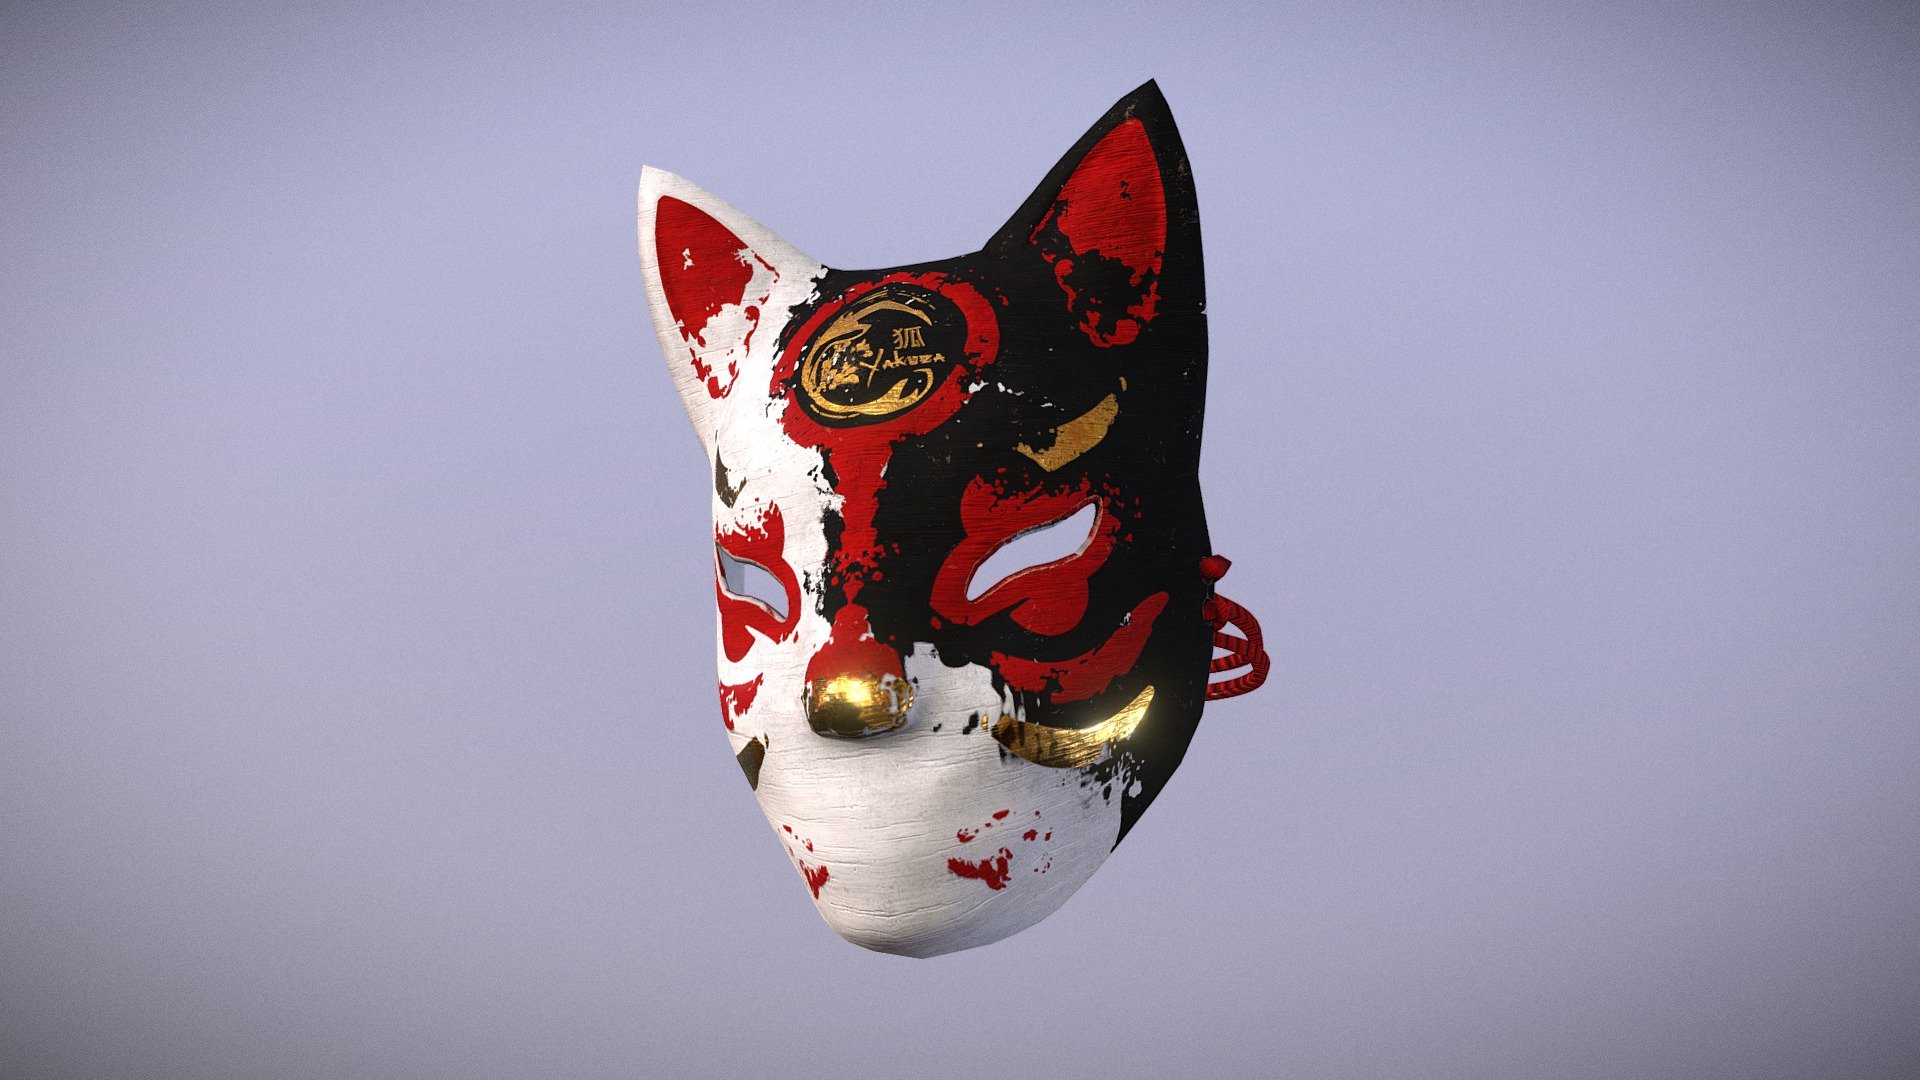 A Kitsune mask commission by a client.

The mask was textured as rough/grunge painted to complment the logo provided by the client 3d model